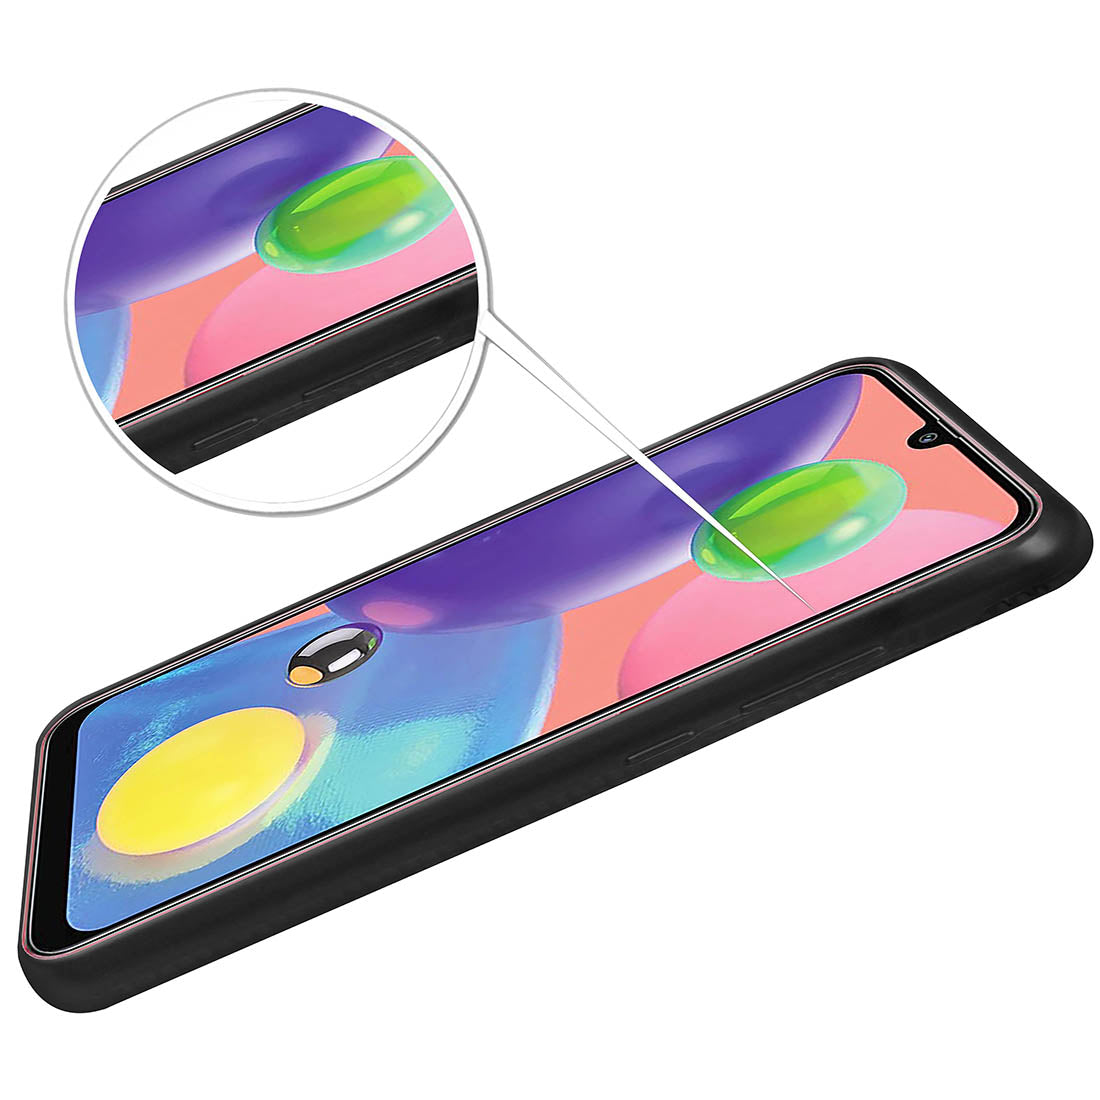 Comfort Grip Back Case Cover for Samsung Galaxy A70s